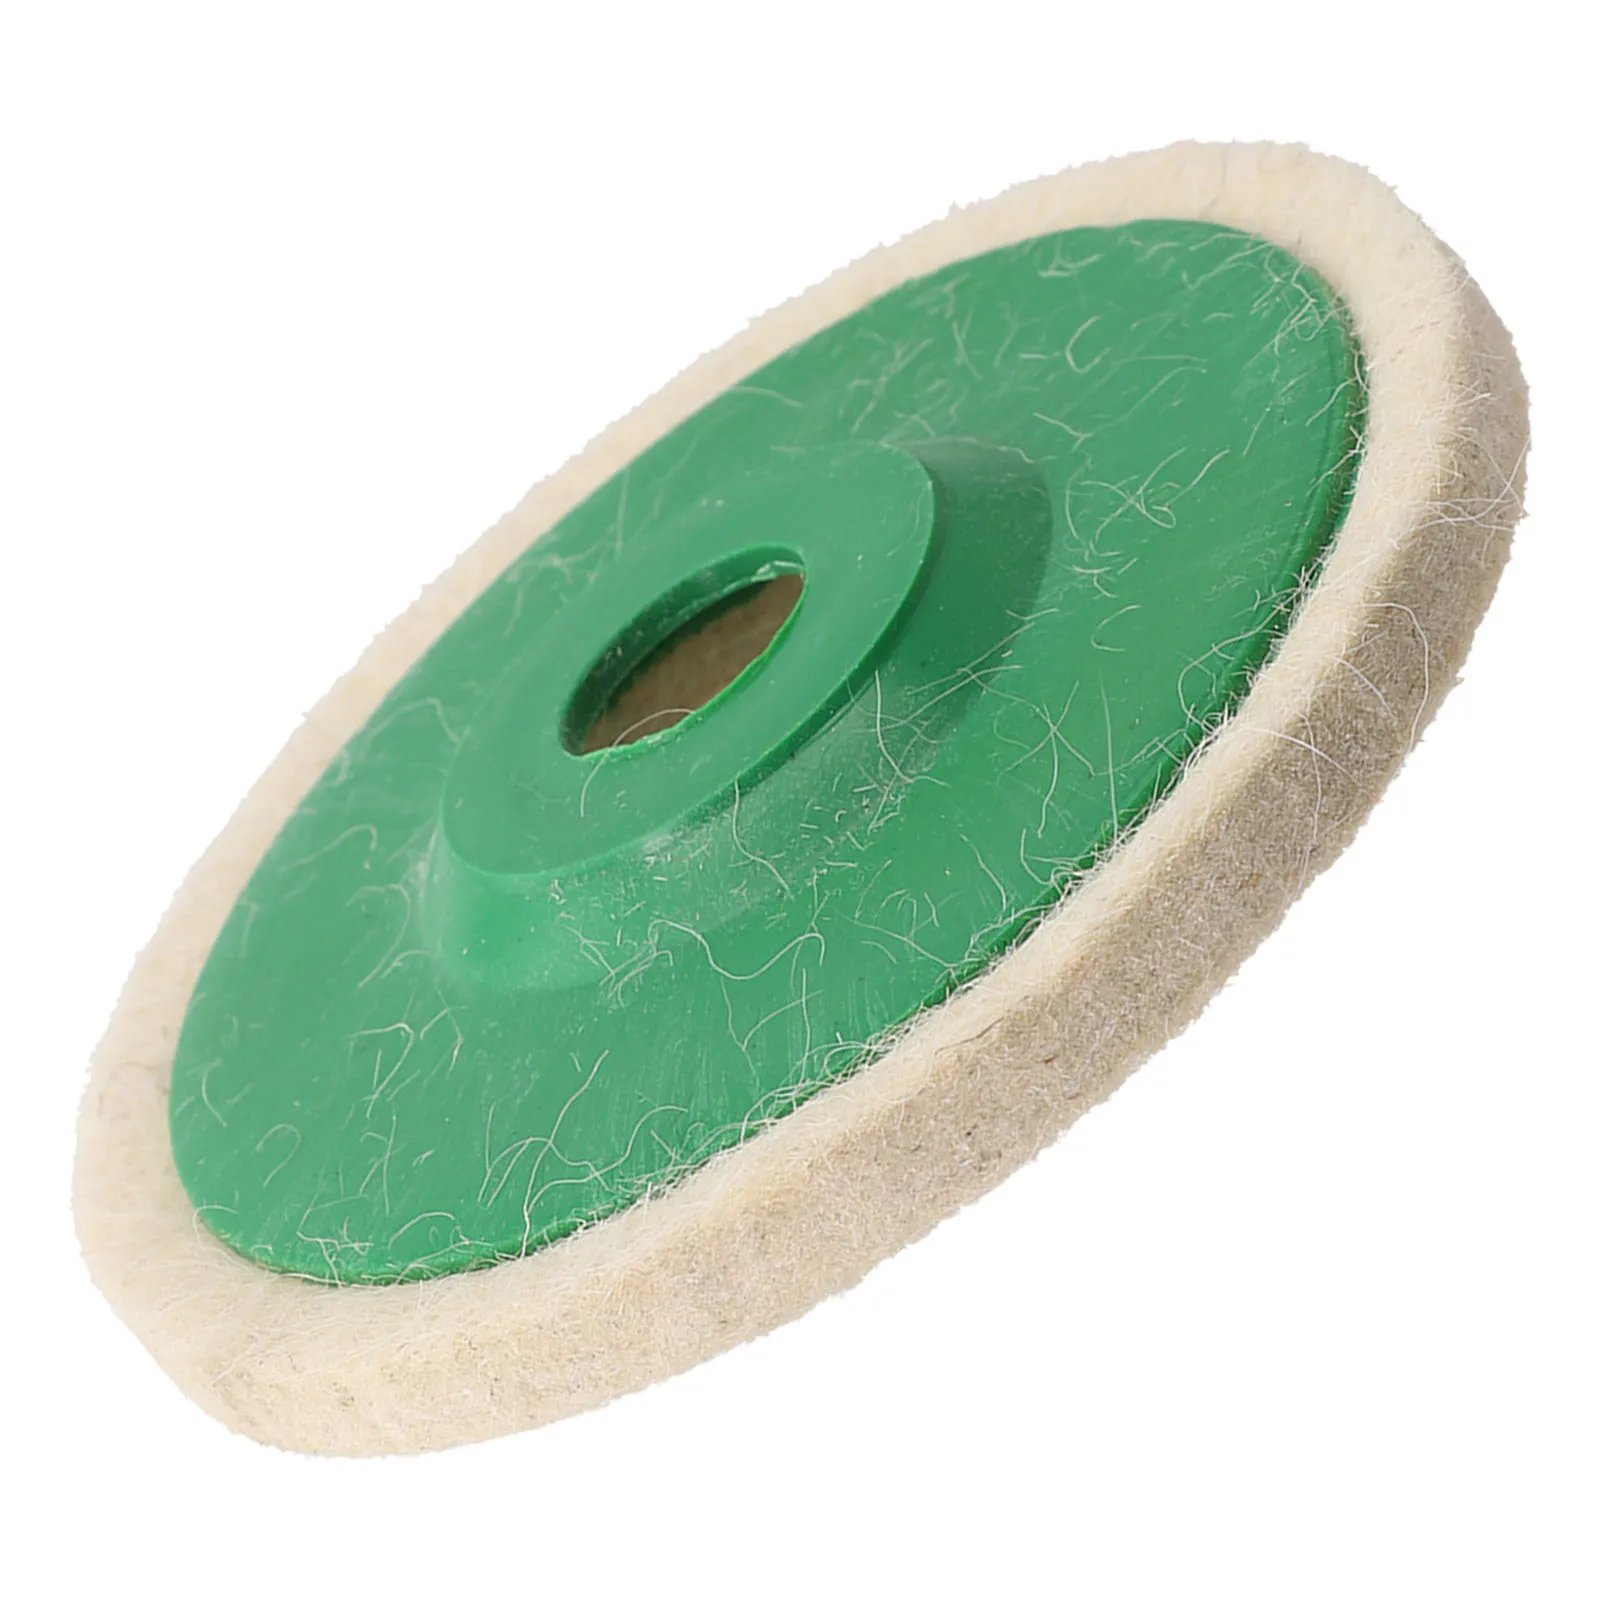 1 Pc 5Inch Wool Polishing Wheels Buffing Pads Angle Grinder Accessories Grinding Disc For Metal Glass Ceramic Polishing Tools